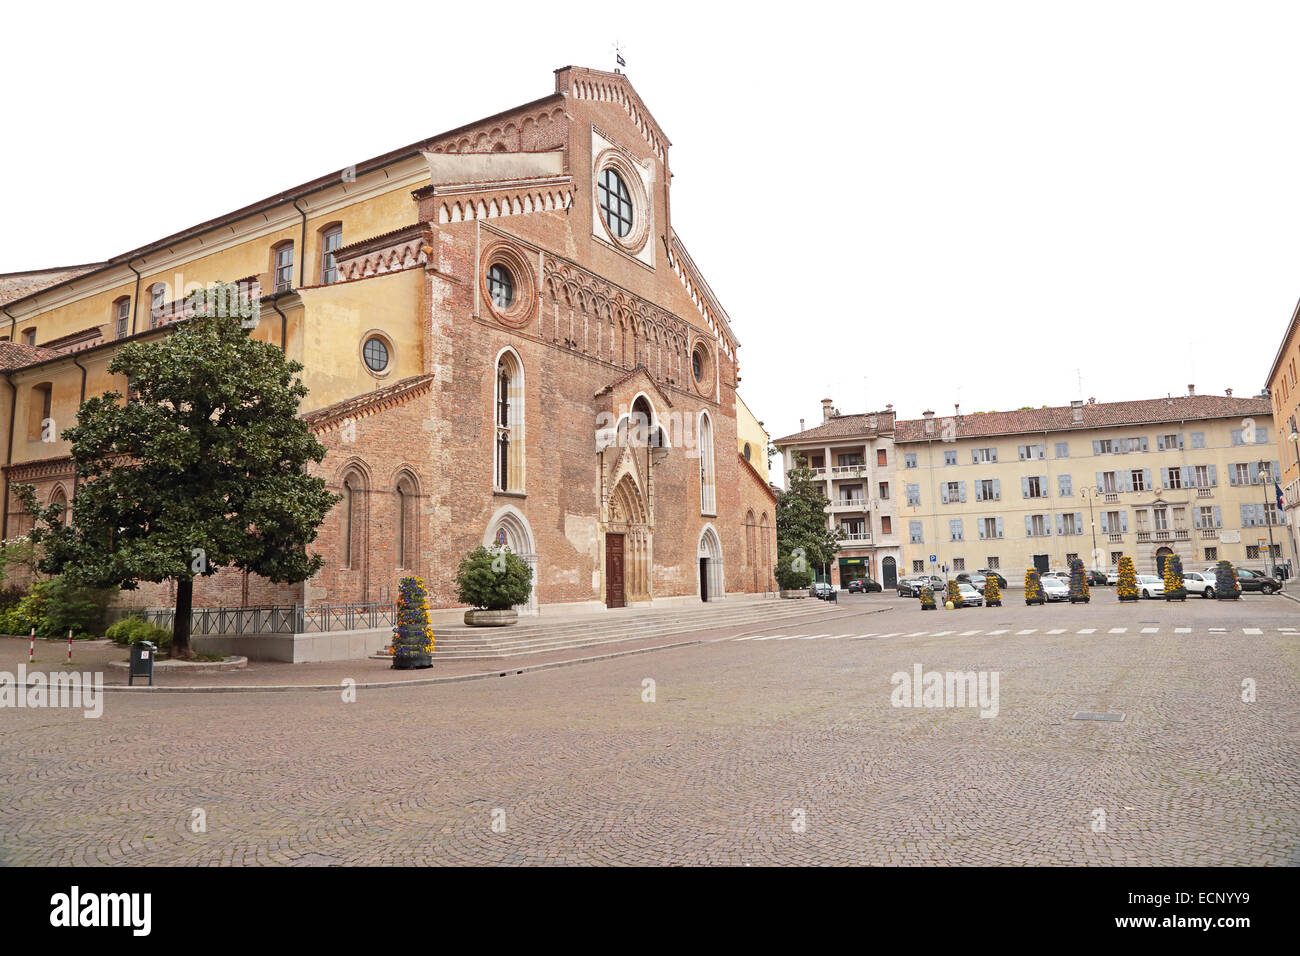 Side view of the roman Catholic Cathedral Santa Maria Maggiore of Udine, Italy Stock Photo